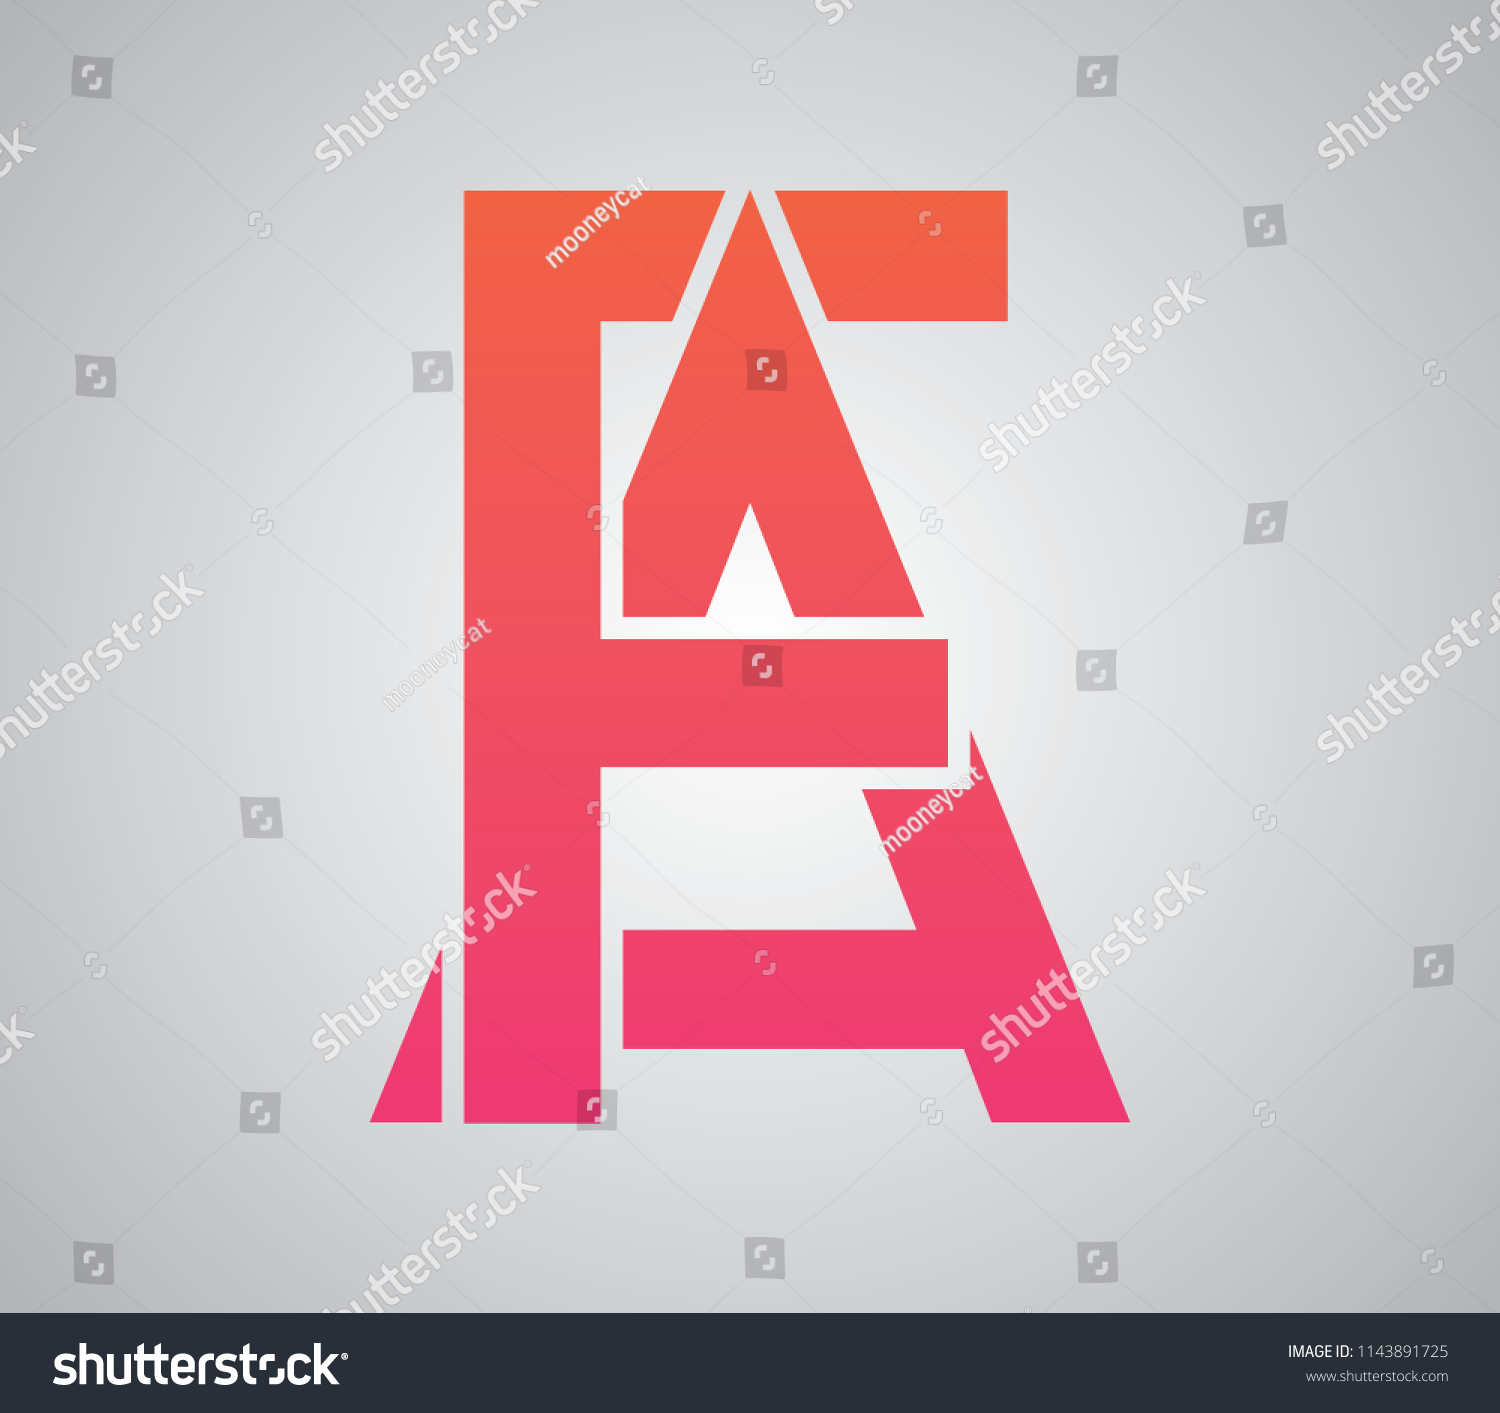 F F Af Fa Letters Unique Stock Vector Royalty Free 1143891725